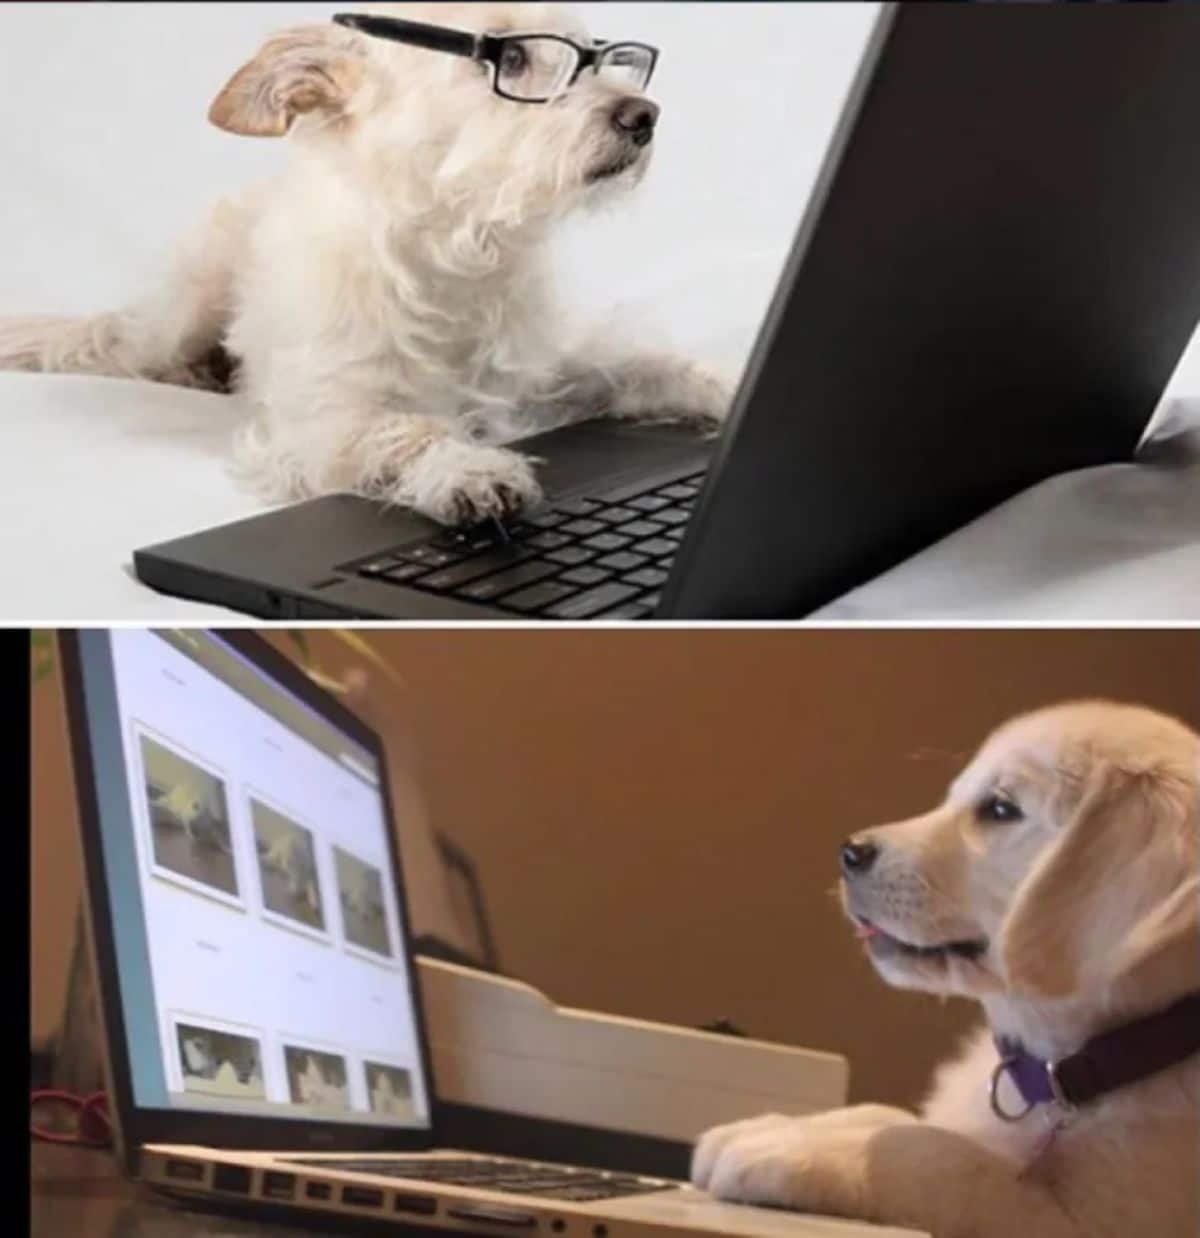 1 photo of fluffy white dog wearing spectacles sitting at a black laptop and 1 photo of golden retriever puppy sitting at a silver laptop